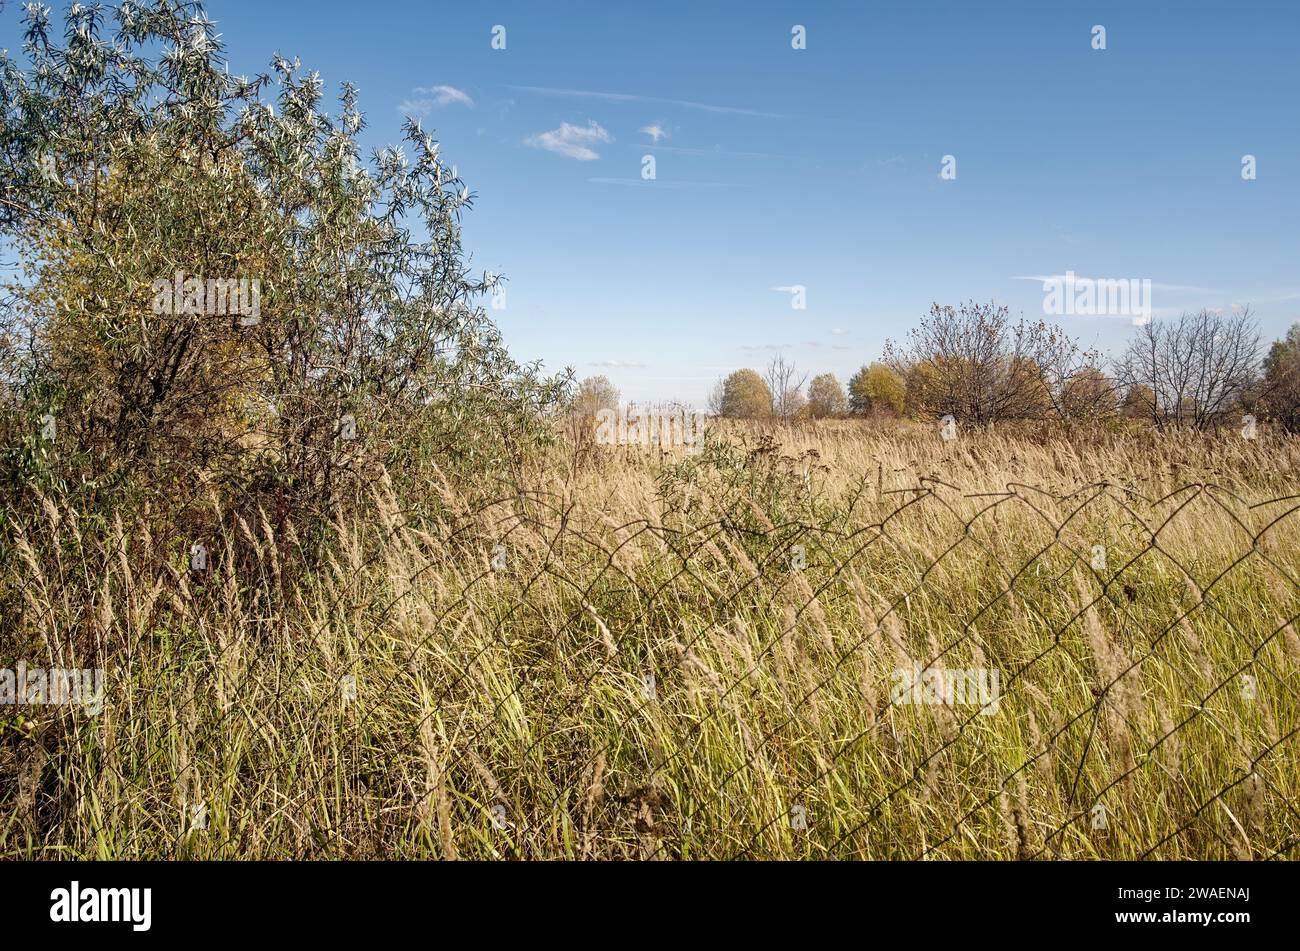 Field behind a mesh fence, in autumn Stock Photo